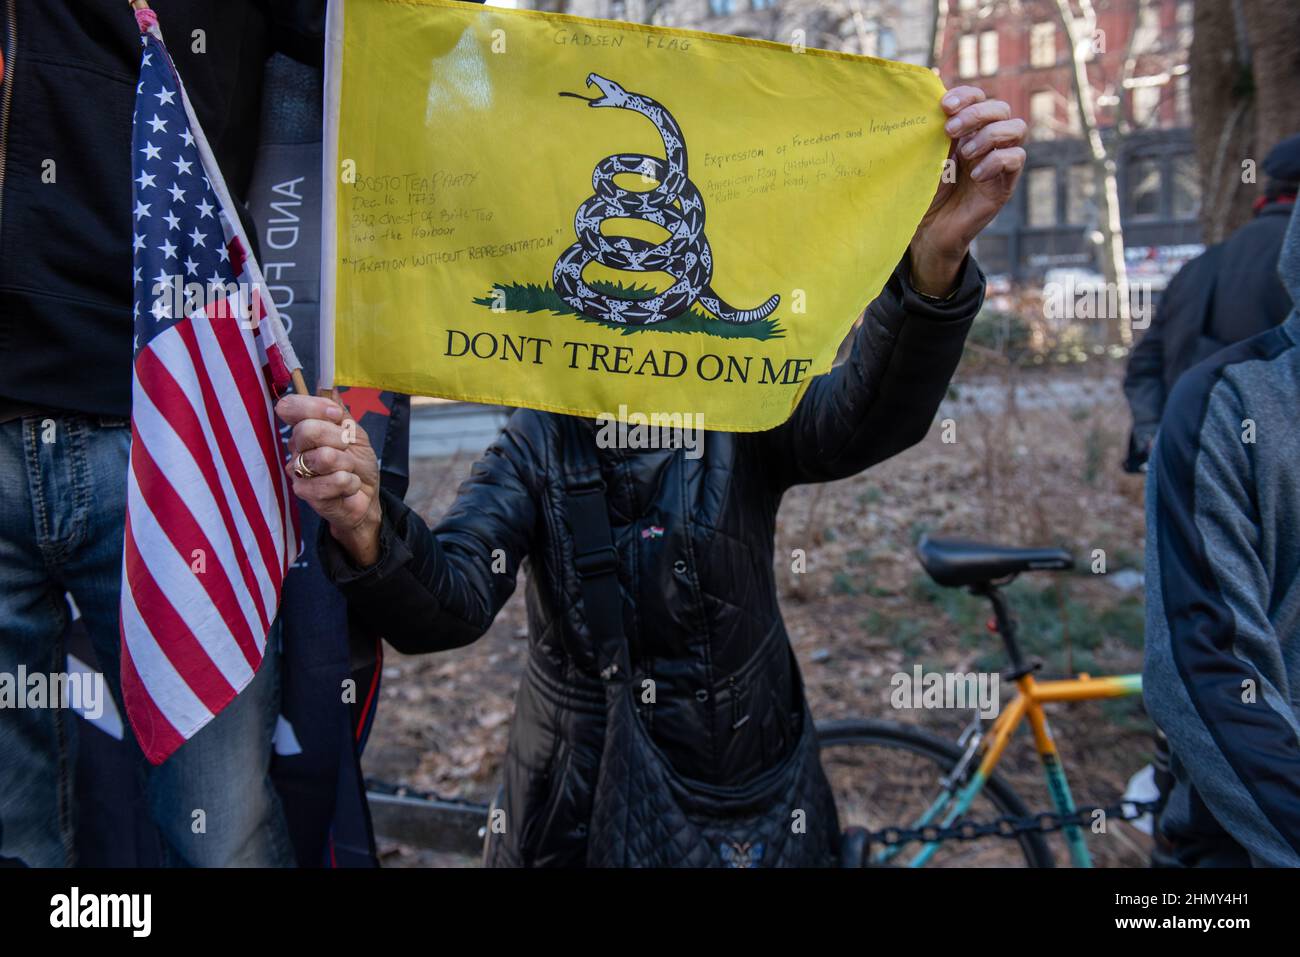 New York, NY, USA - February 11, 2022: Woman holds a Gadsden flag that reads 'Dont Tread On Me' at a demonstration to protest New York City’s vaccine Stock Photo